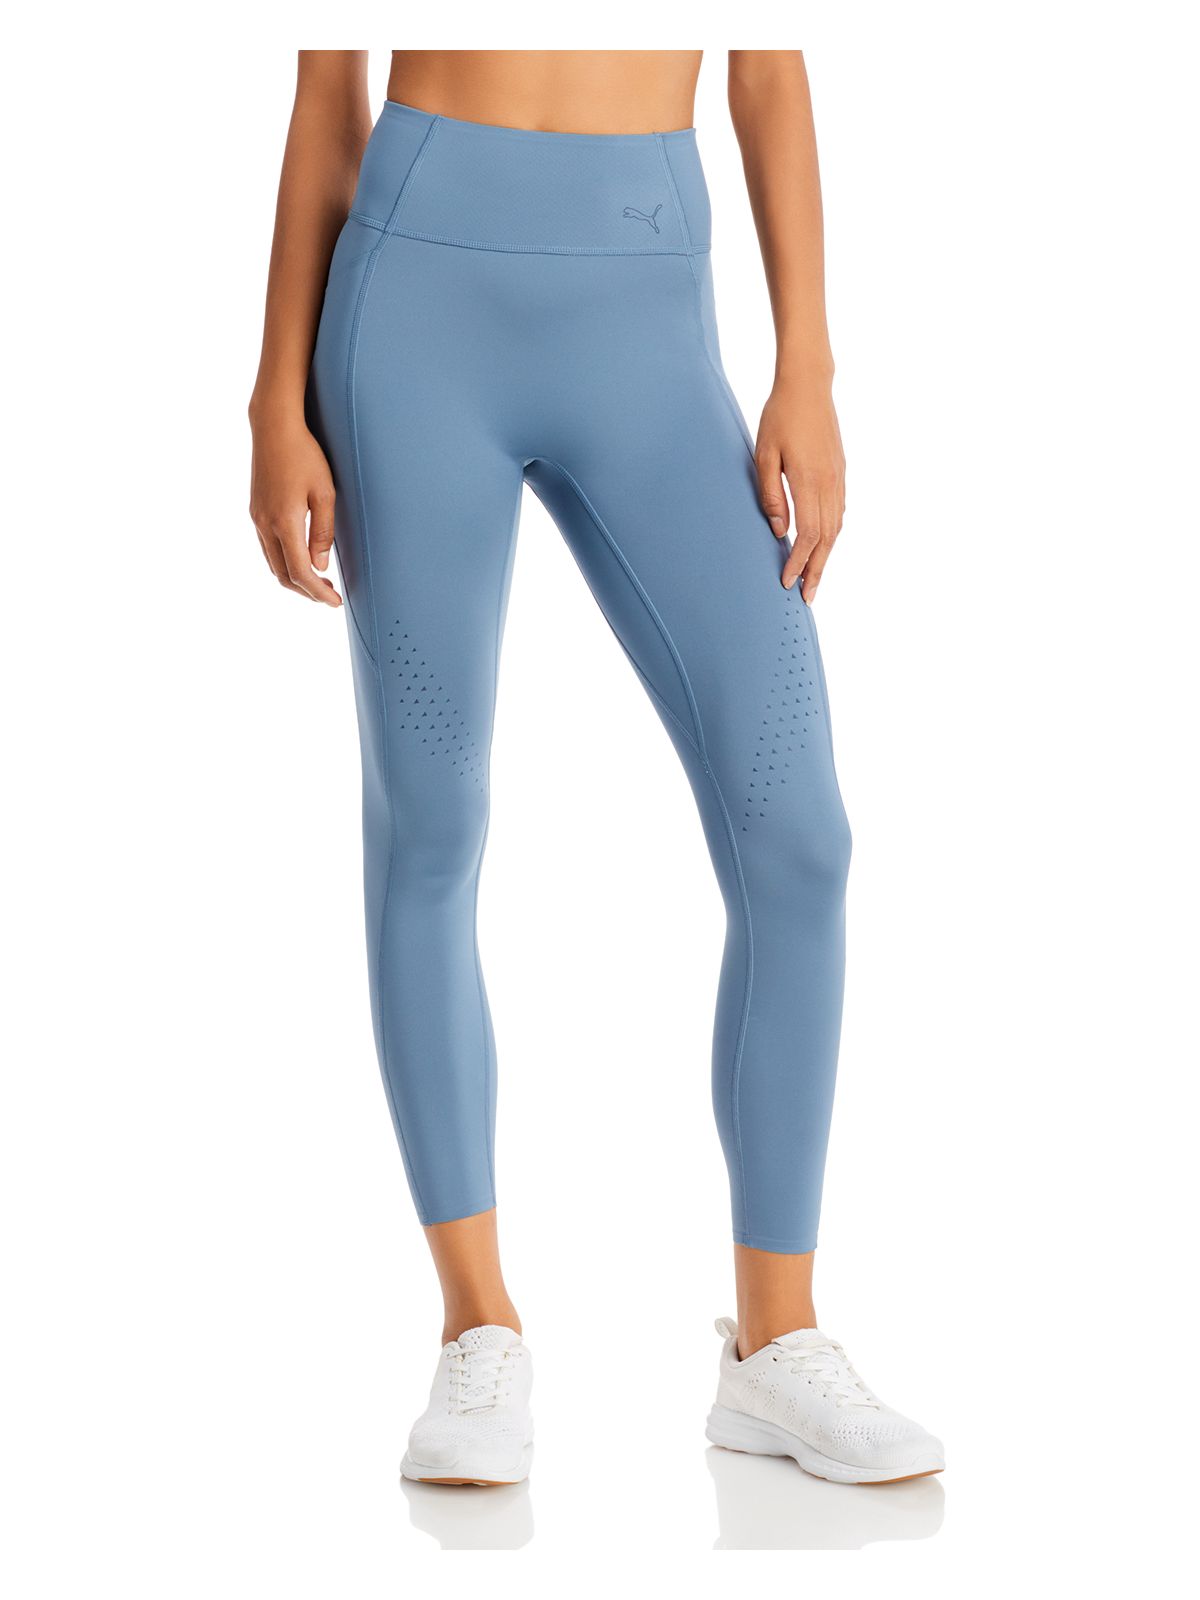 PUMA Womens Blue Quick-Dry Pocketed Stretch Active Wear High Waist Leggings M